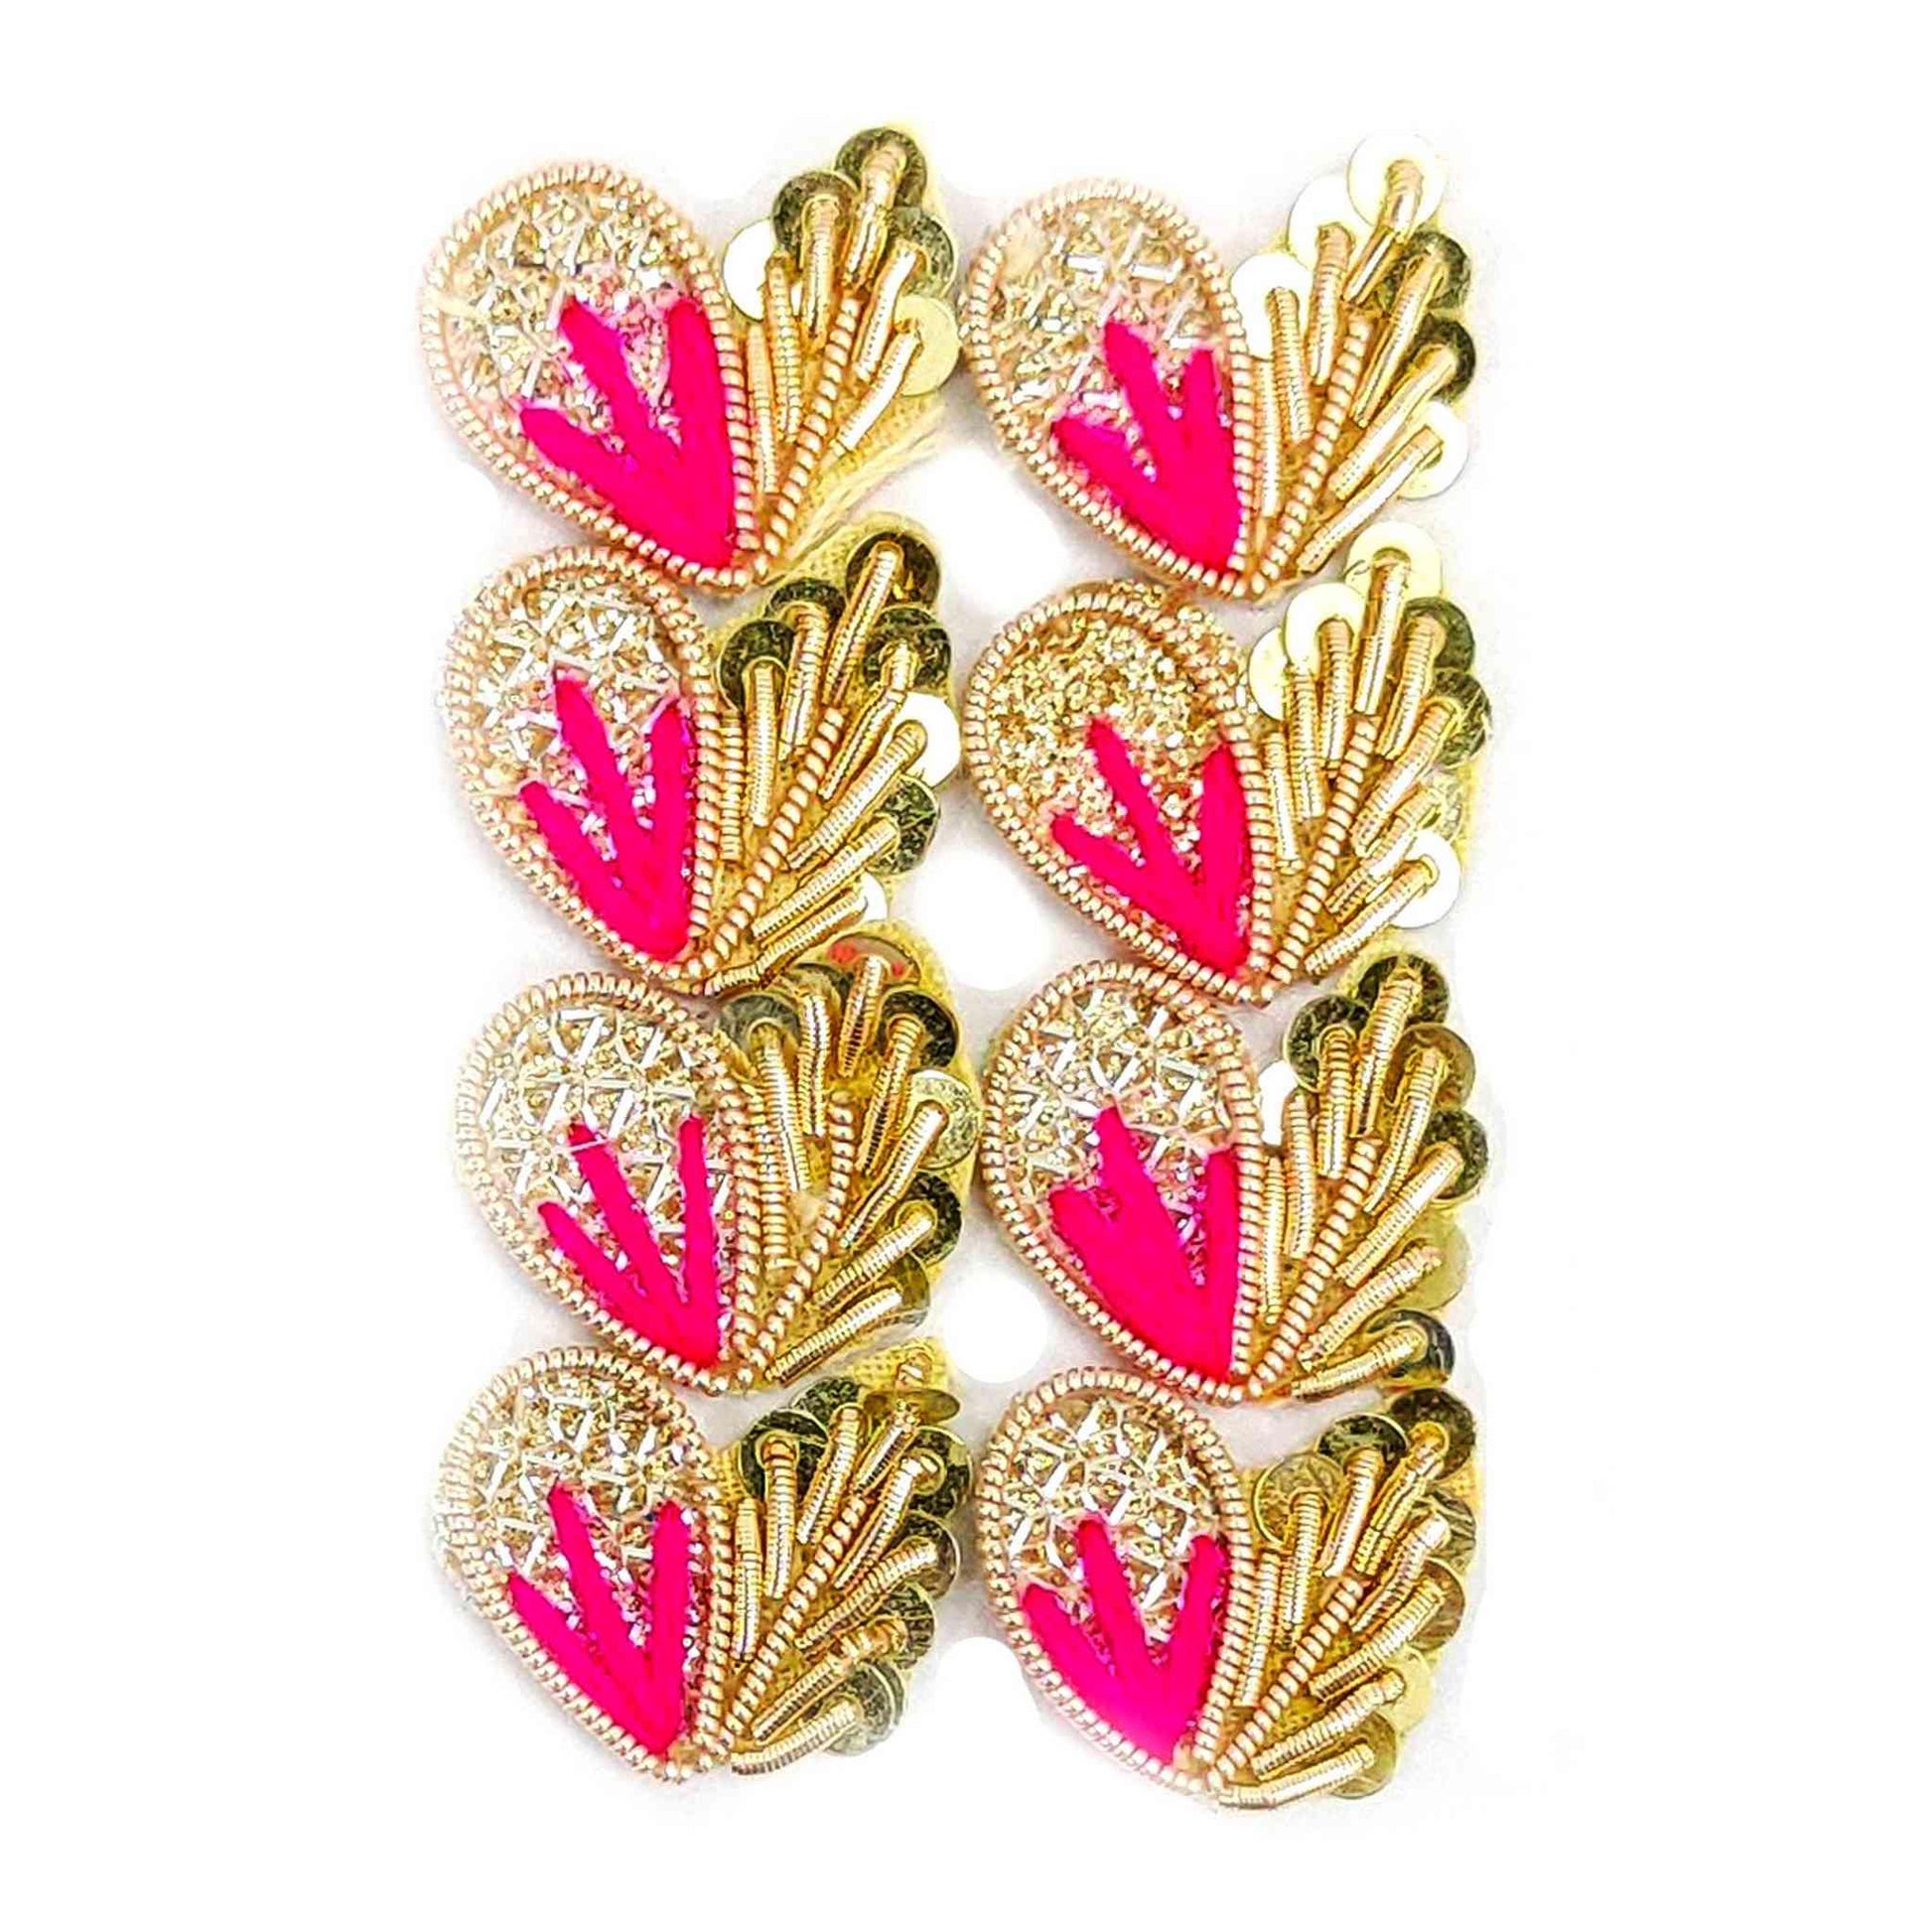 Fancy Leaf Stem Buti with Zari Wire and Beads for DIY Craft, Trousseau Packing or Decoration (Bunch of 12) - Design 232, Pink - Indian Petals